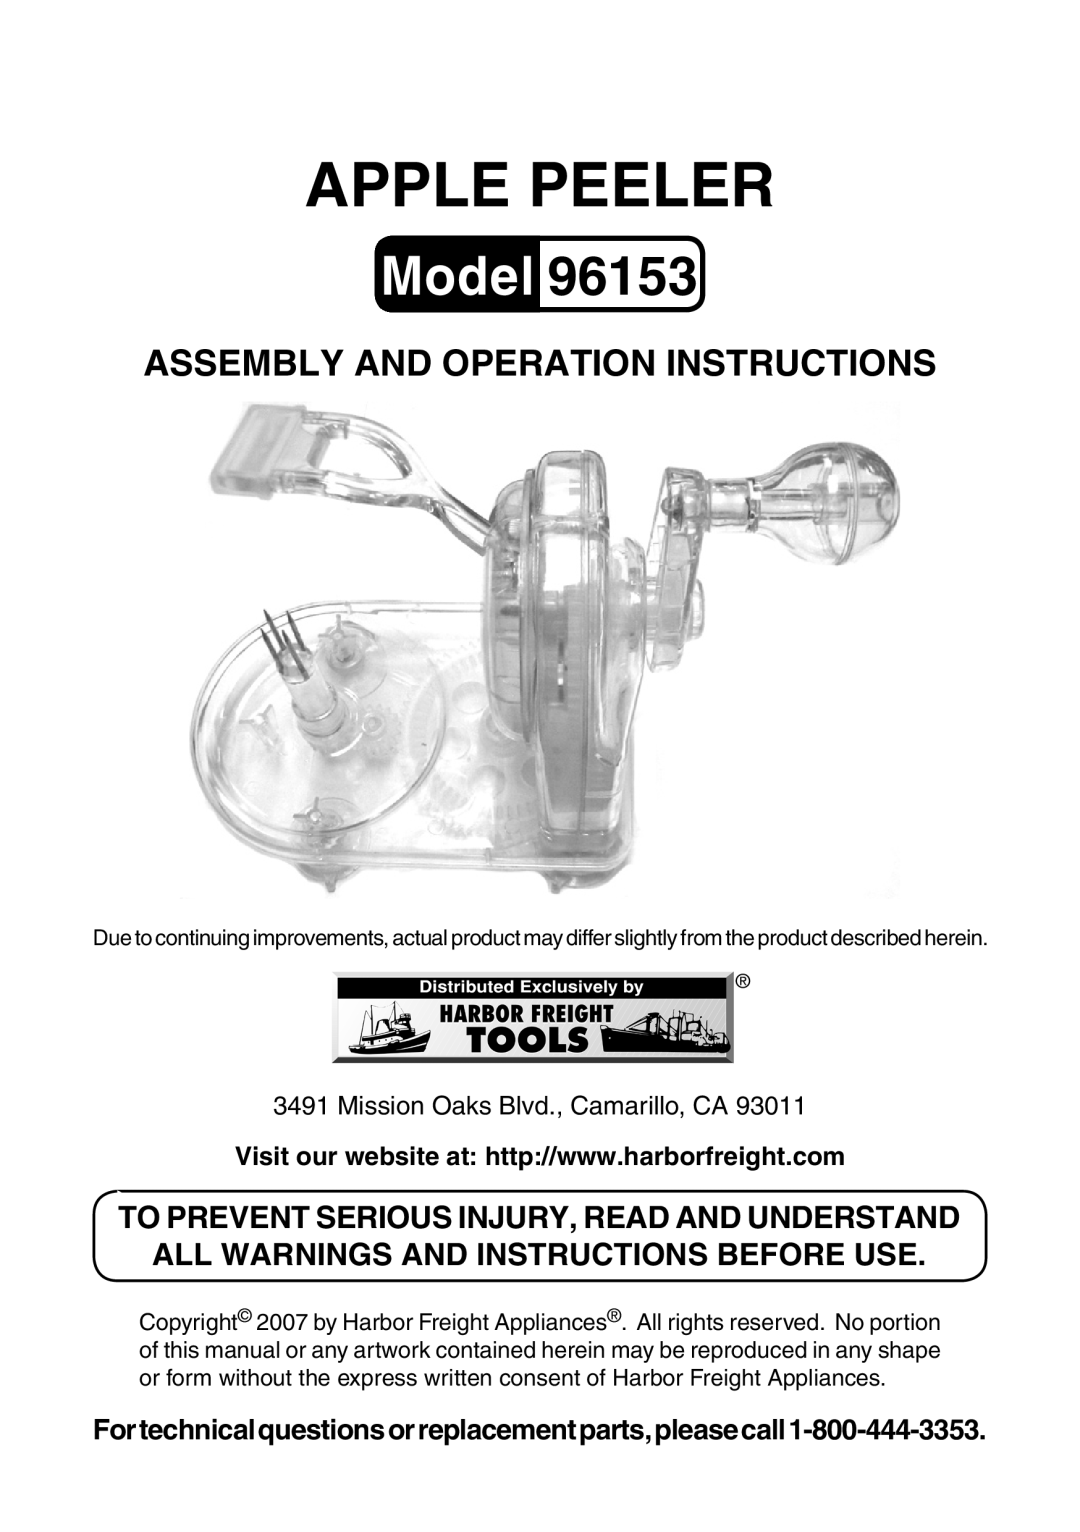 Harbor Freight Tools 96153 manual Fortechnicalquestionsorreplacementparts,pleasecall1-800-444-3353, Apple peeler, Model 